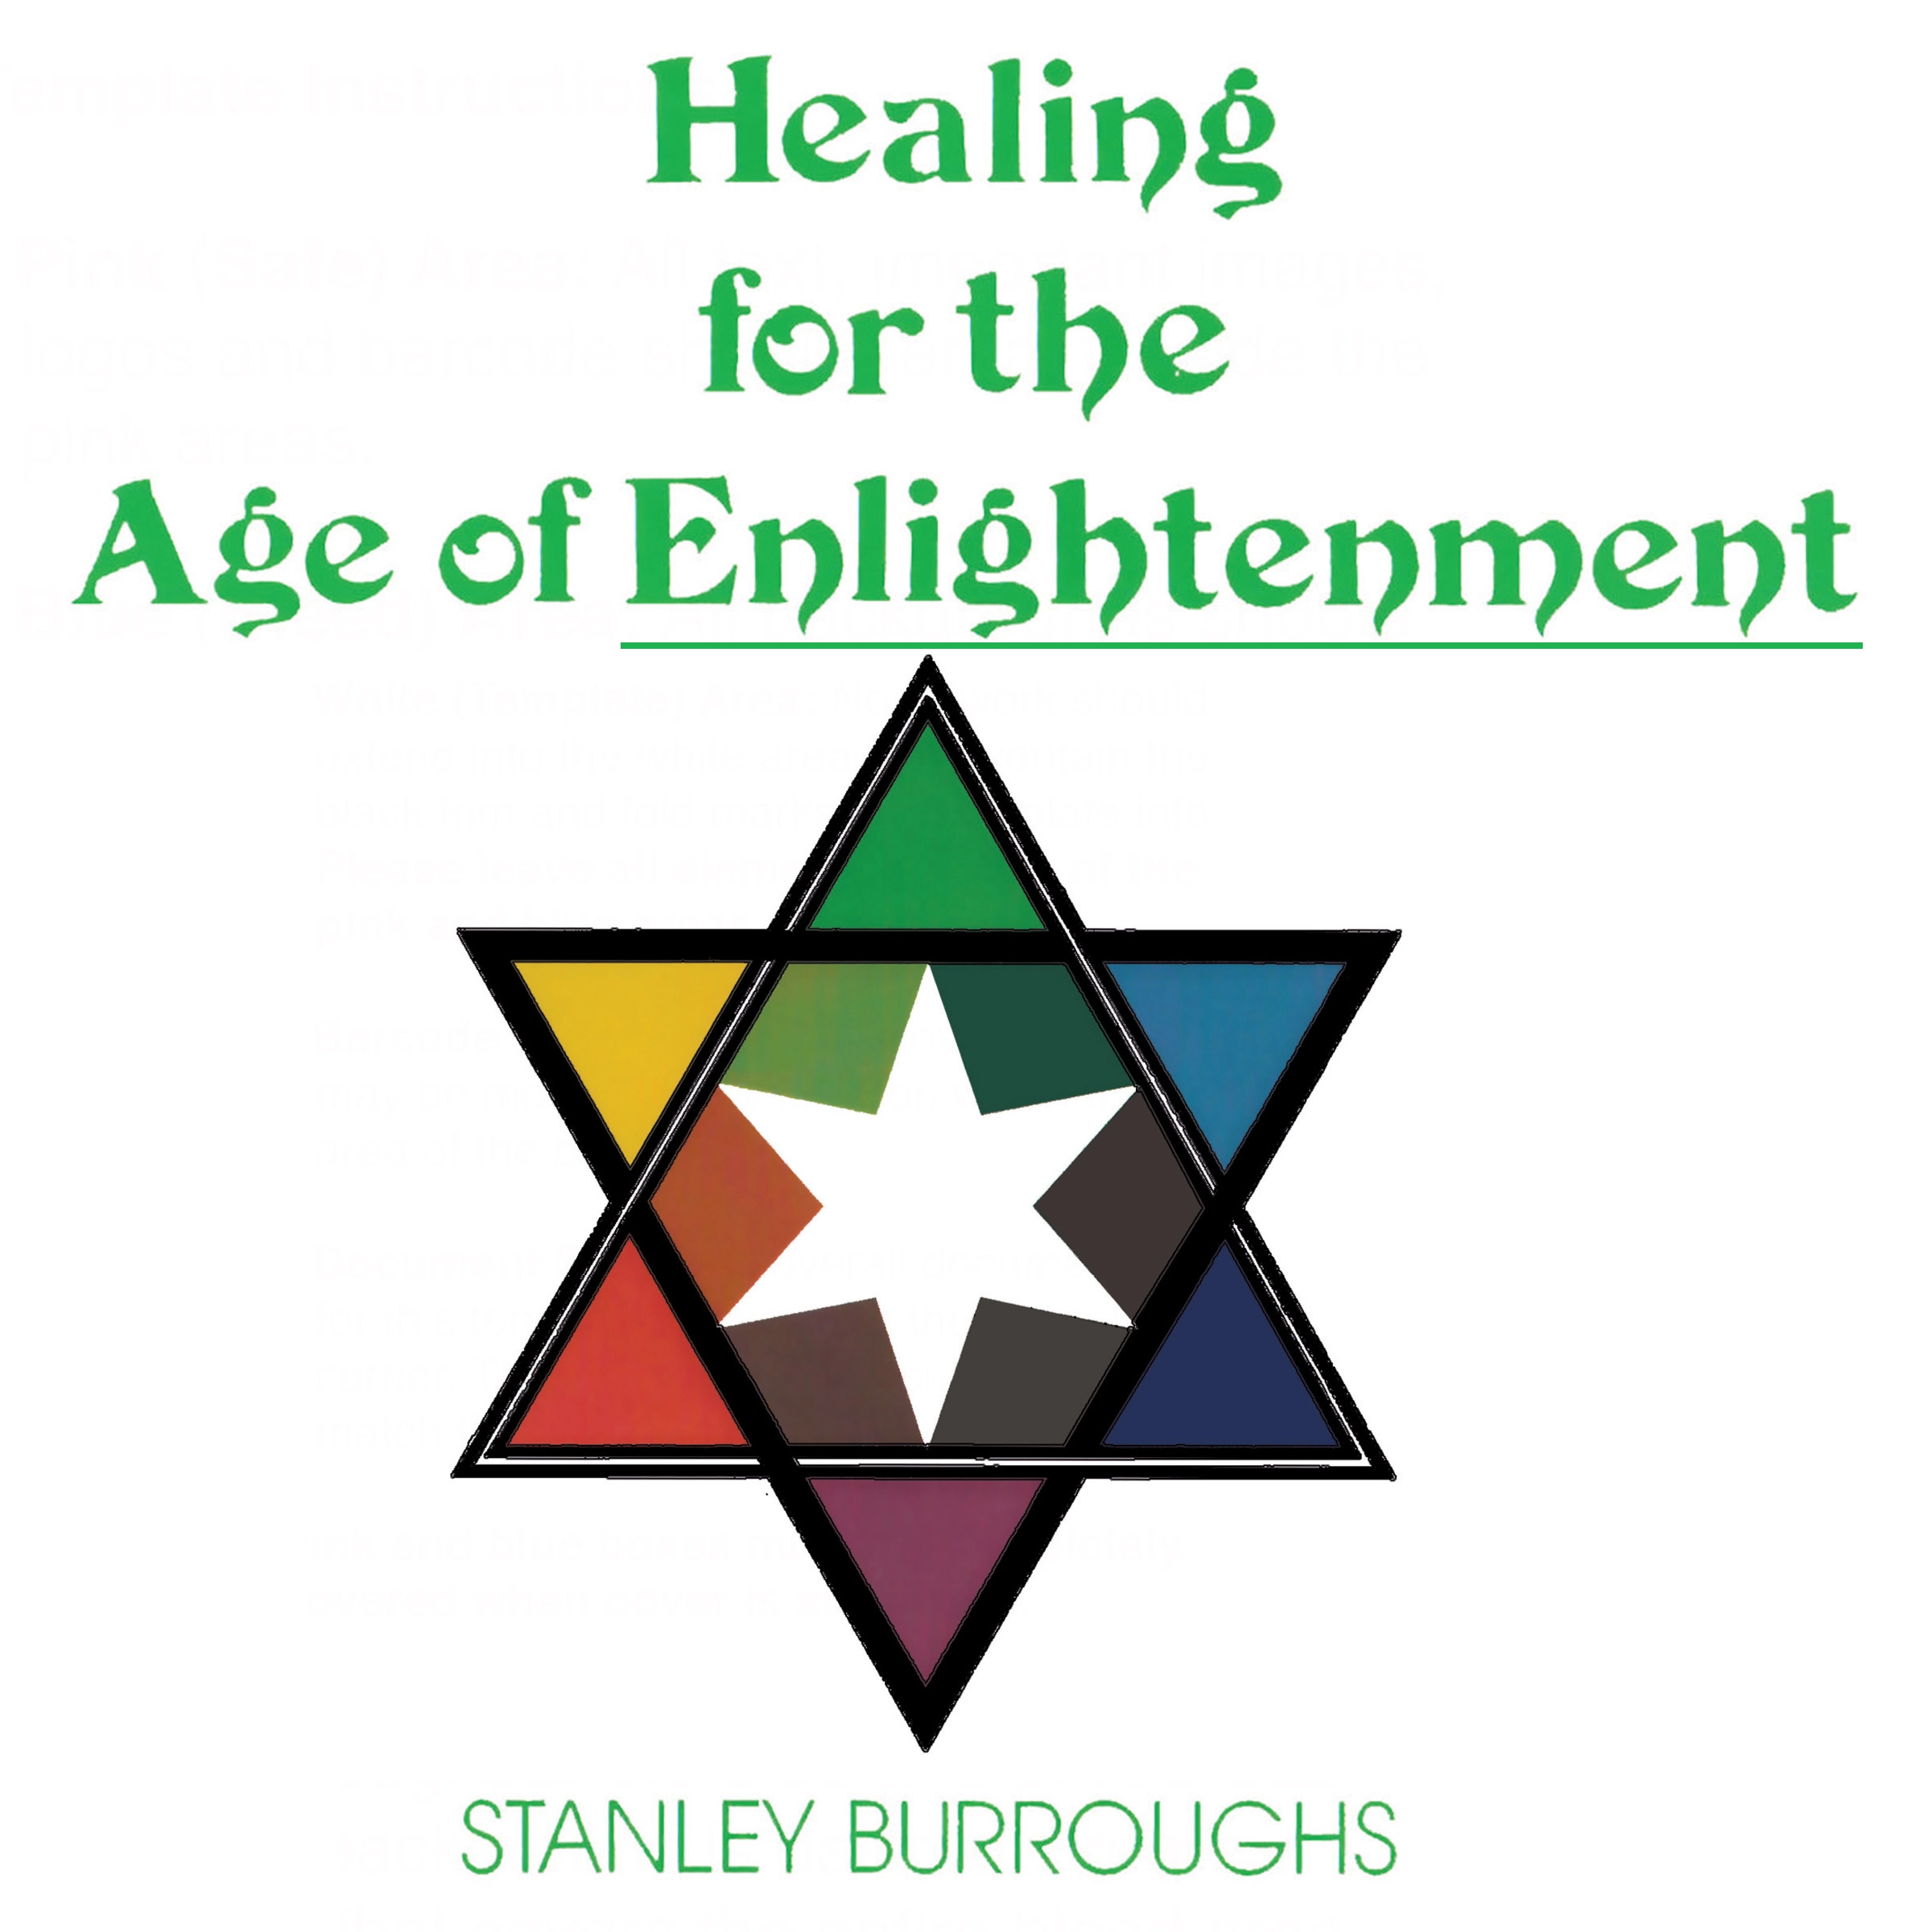 Healing for the Age of Enlightenment Audiobook by Stanley Burroughs